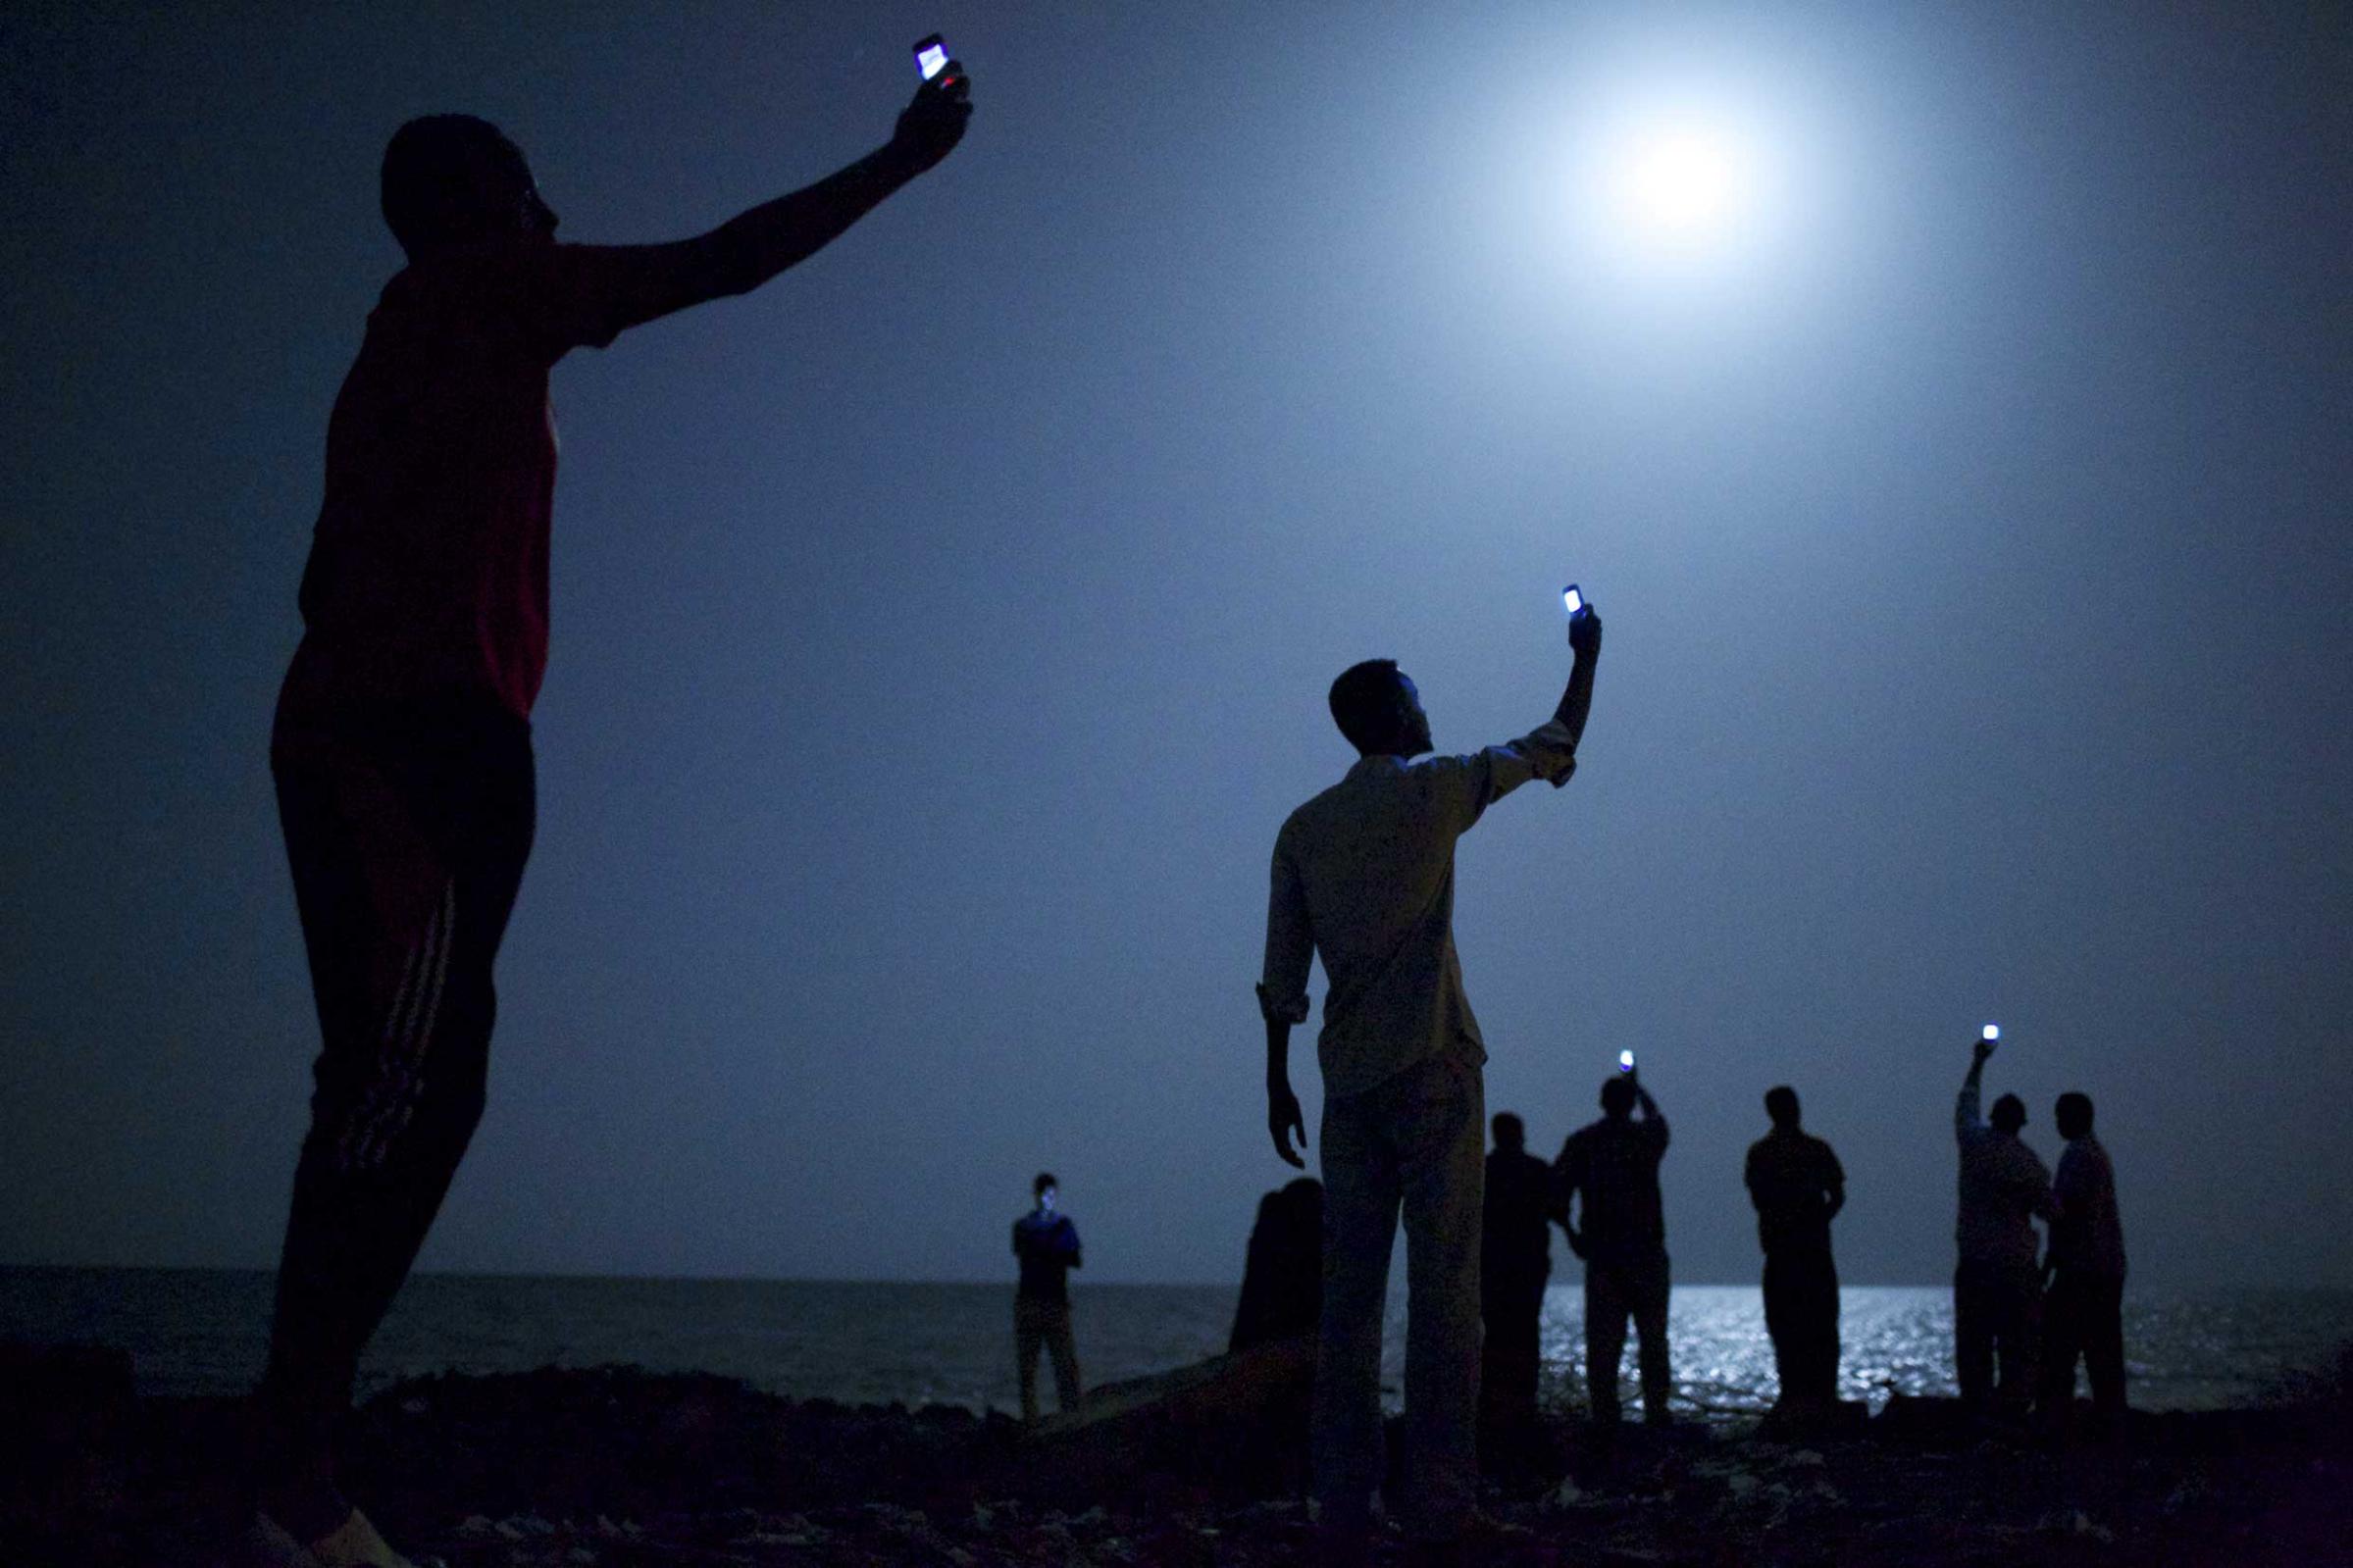 World Press Photo of the Year 2013.26 February 2013, Djibouti City, Djibouti. African migrants on the shore of Djibouti city at night, raising their phones in an attempt to capture an inexpensive signal from neighboring SomaliaÑa tenuous link to relatives abroad. Djibouti is a common stop-off point for migrants in transit from such countries as Somalia, Ethiopia and Eritrea, seeking a better life in Europe and the Middle East.